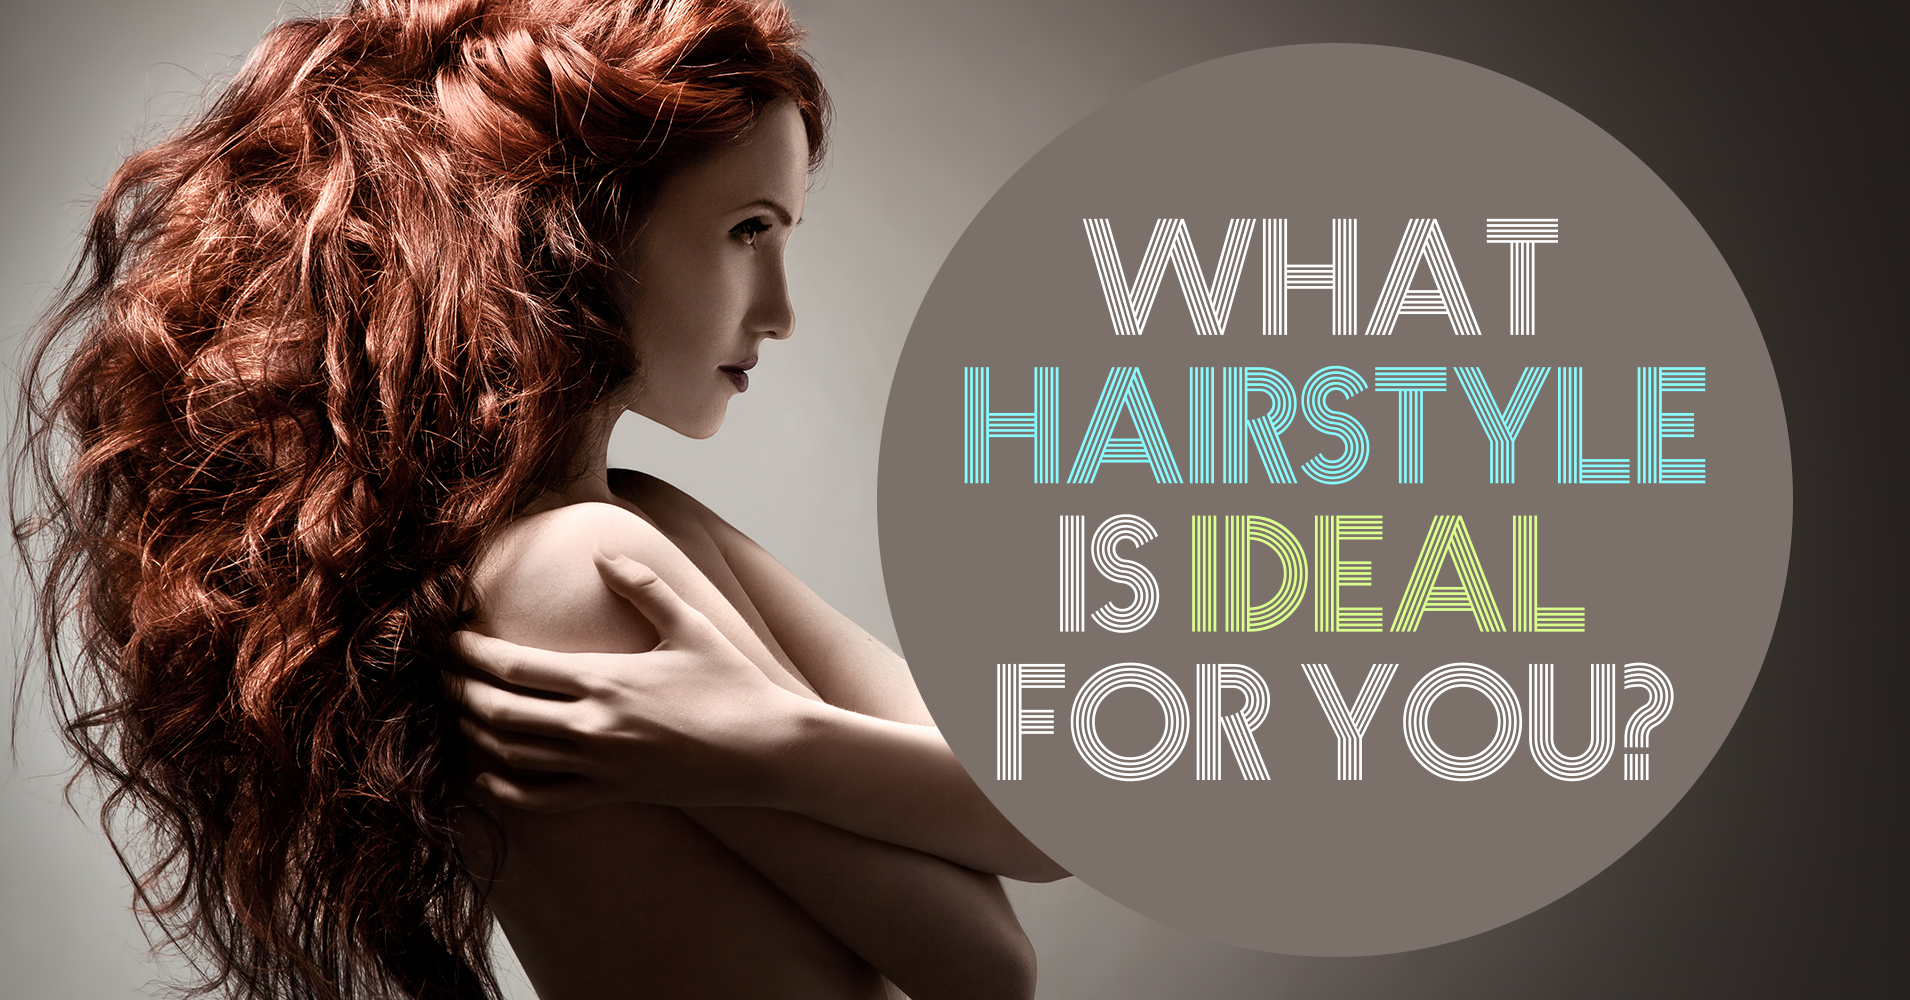 What Is Your Ideal Hair Cut? - Quiz - Quizony.com